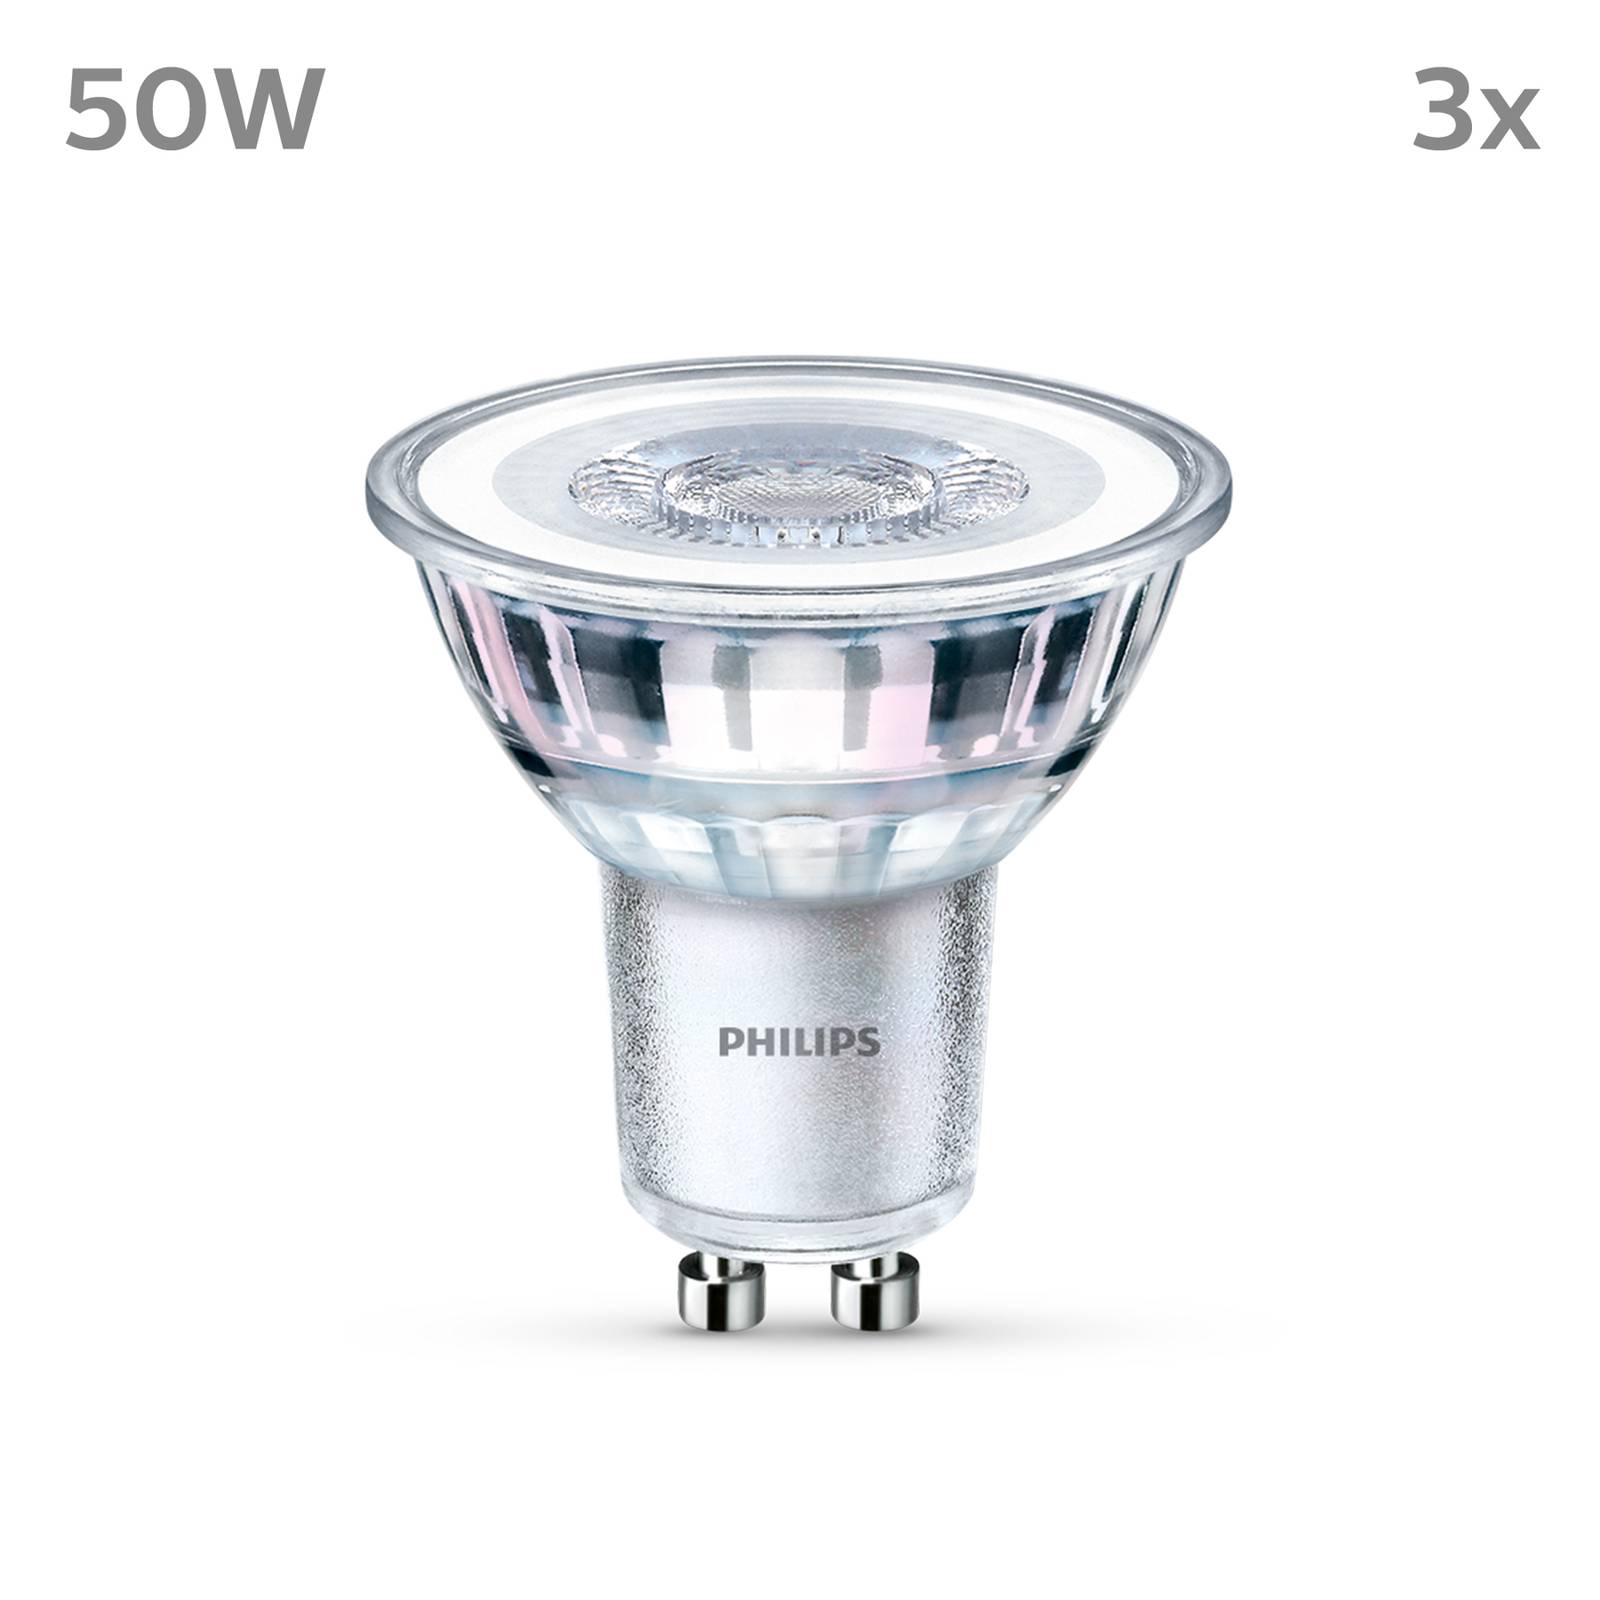 Philips LED GU10 4,6 W 390 lm 840 claire 36° x3